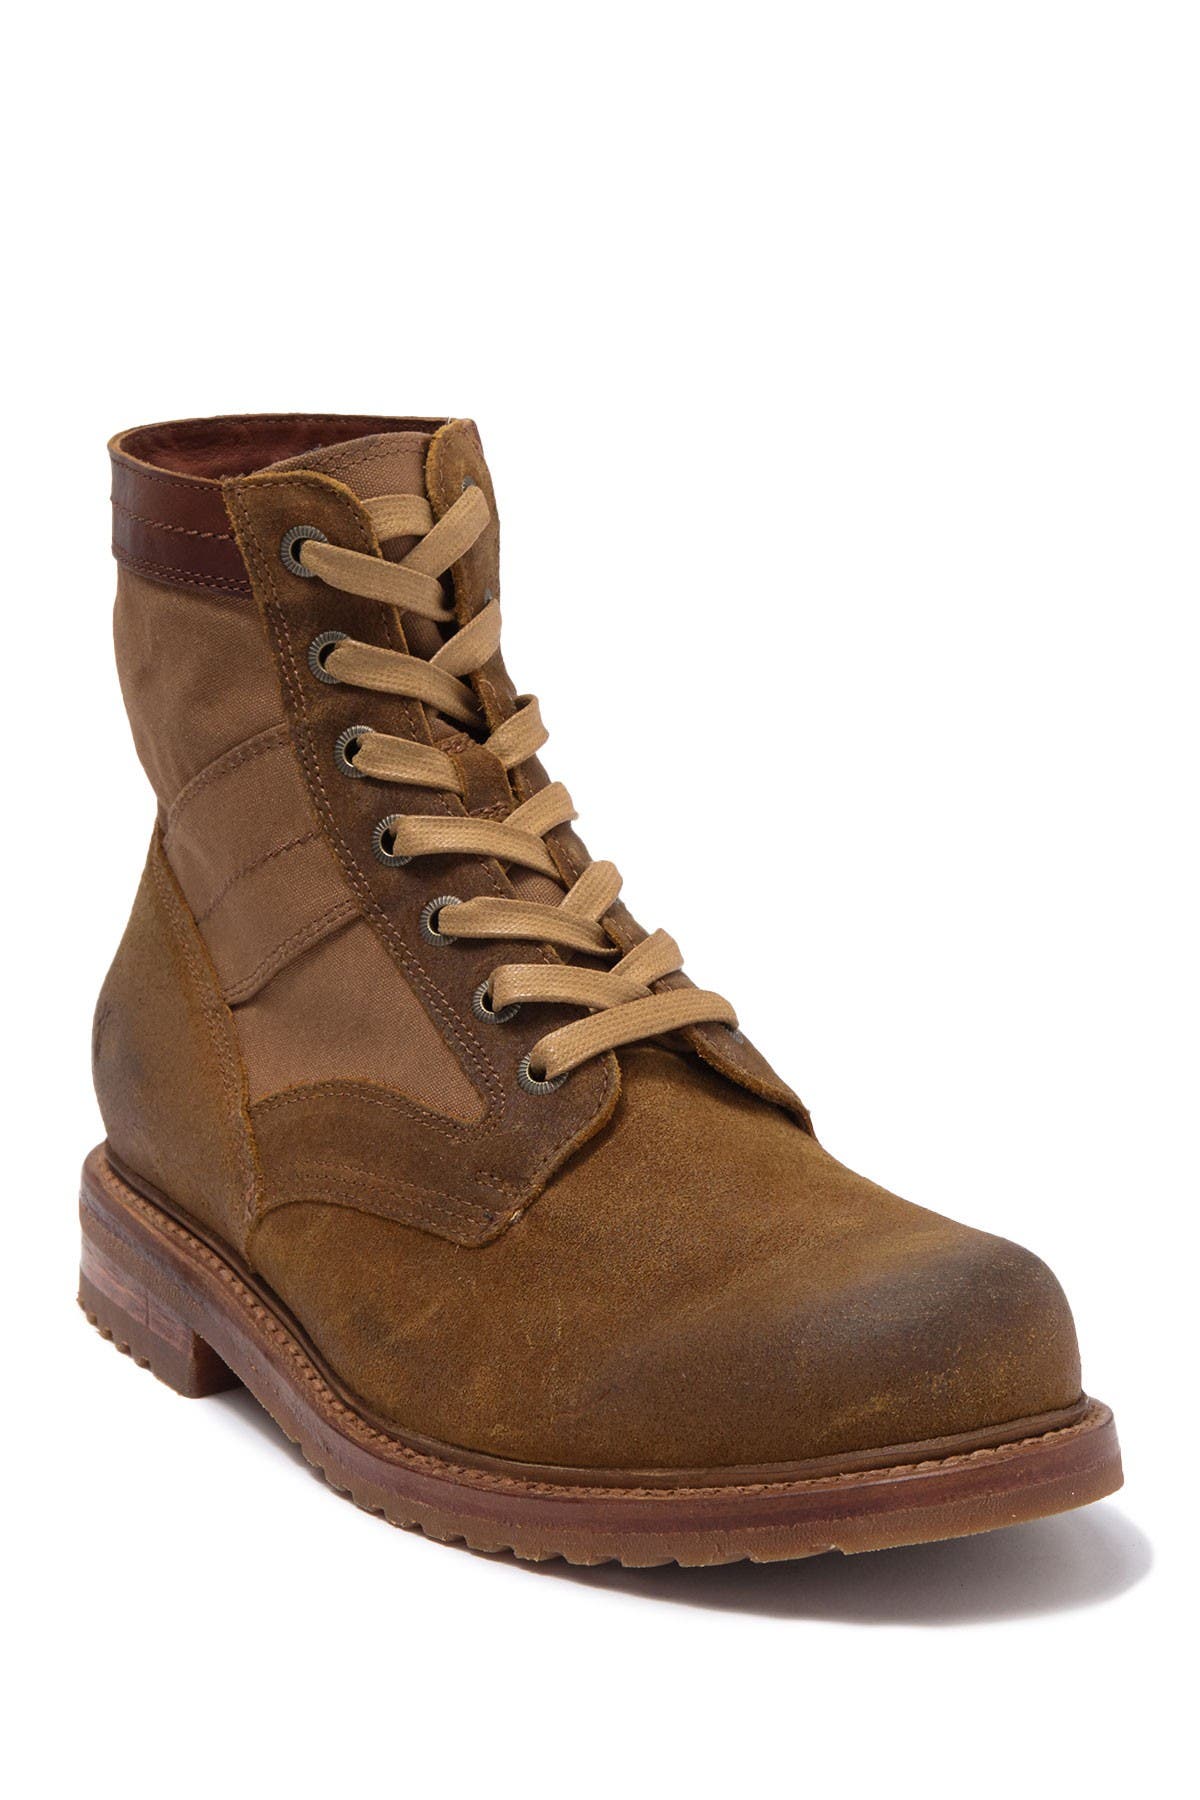 Frye | Mayfield Lace-Up Boot 